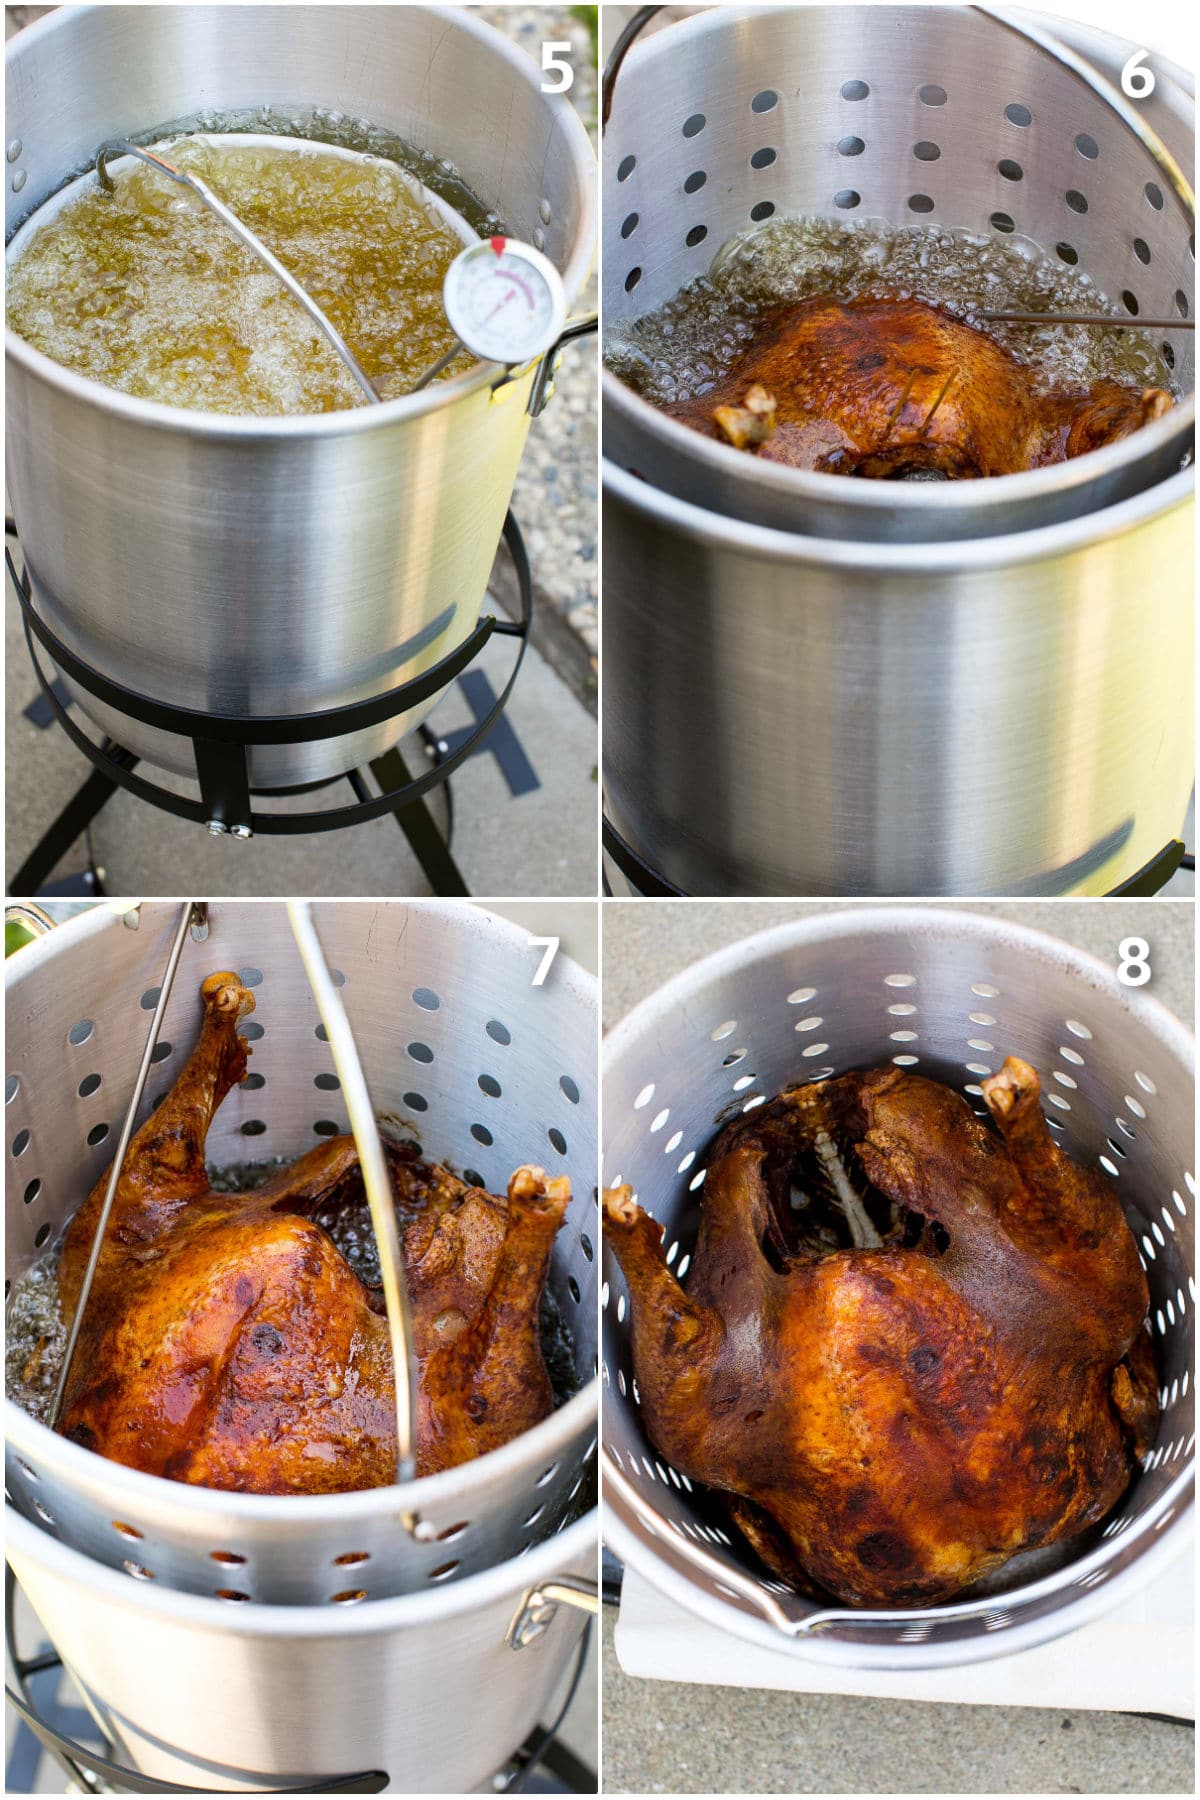 Process shots showing how to deep fry a turkey.